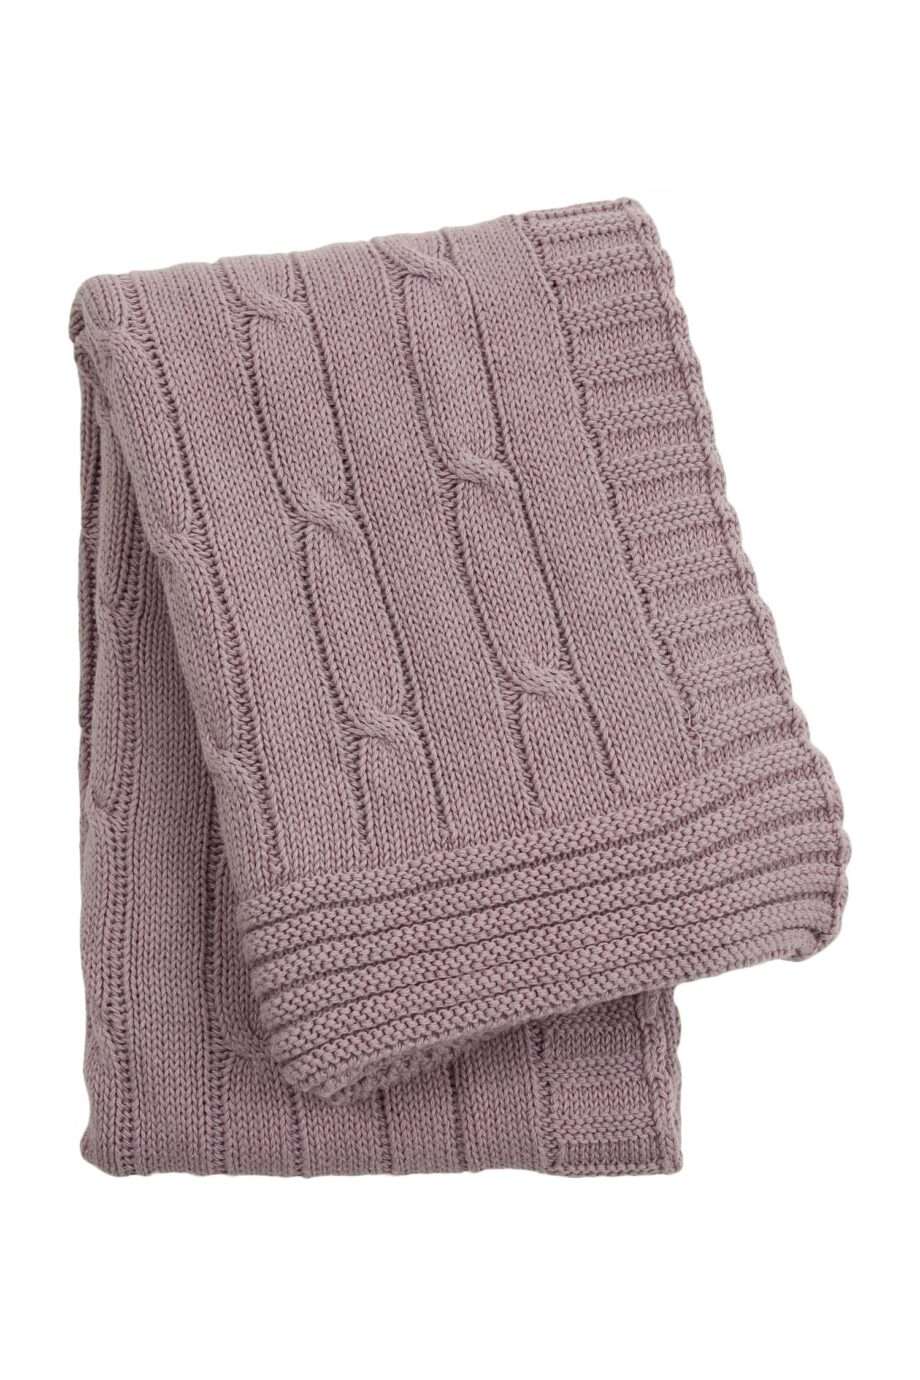 twist violet knitted cotton little blanket small